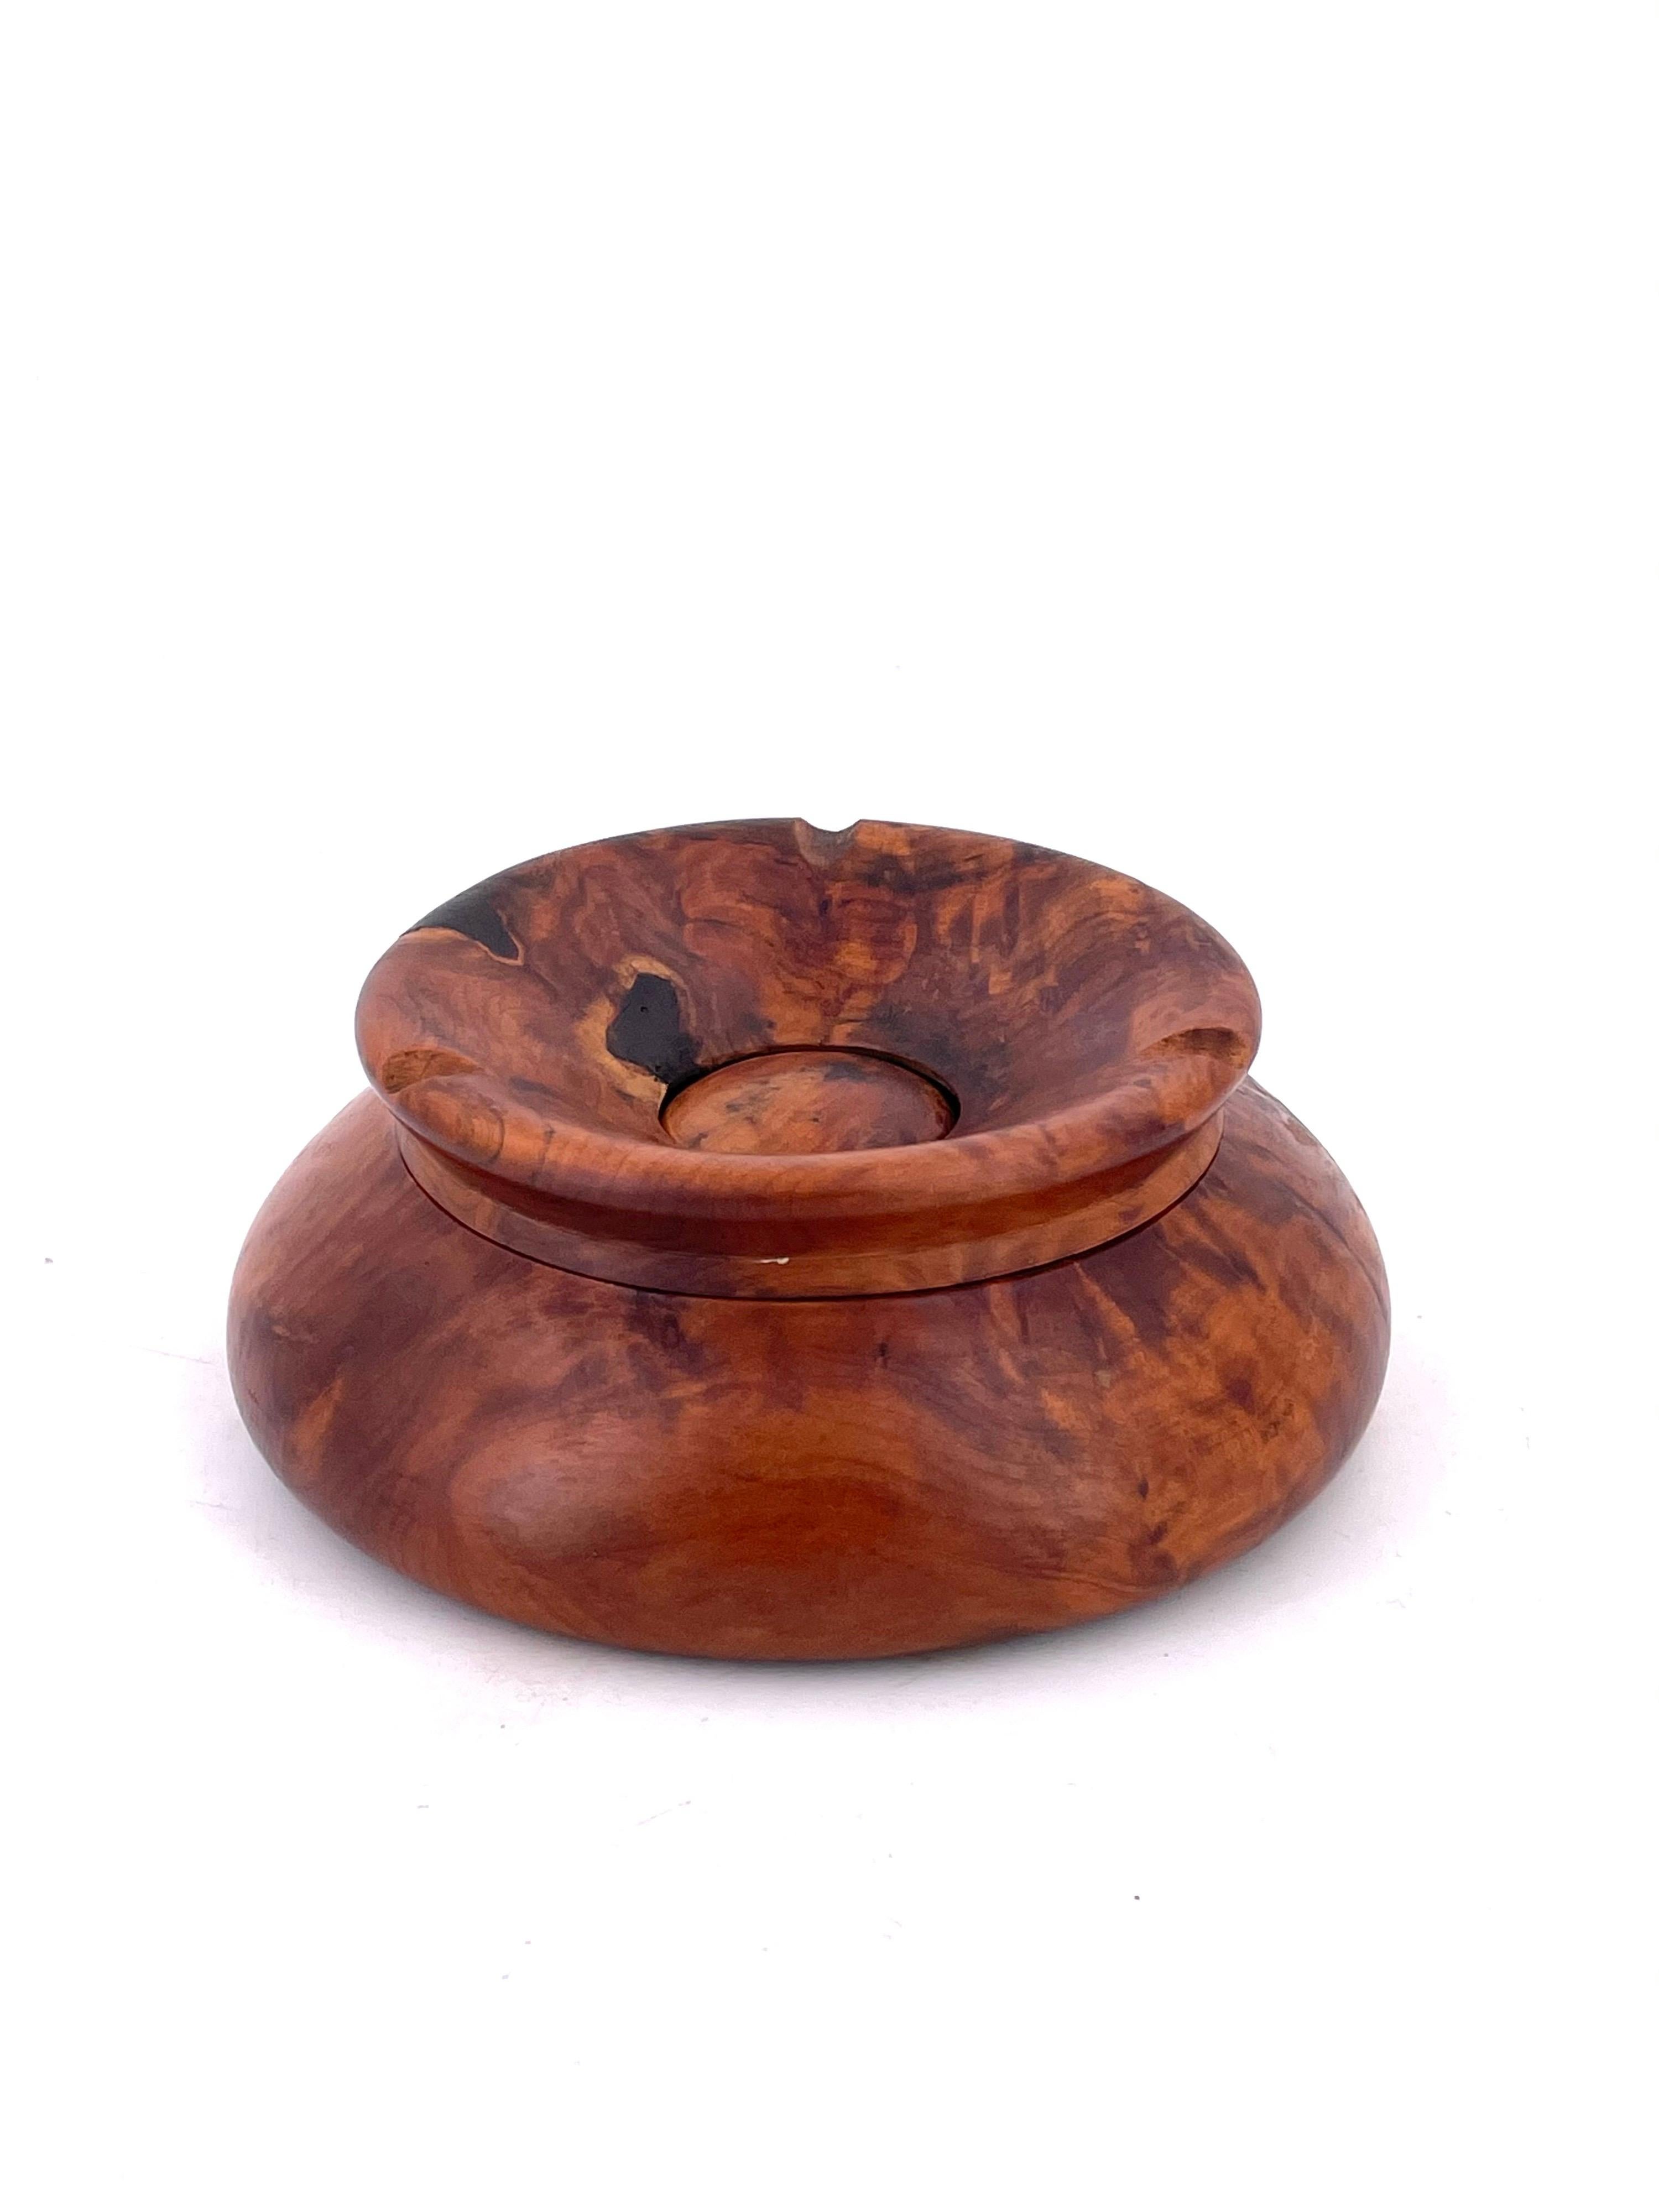 A beautiful piece of hand carved burlwood ashtray with a removable top to keep the fumes inside natural wear due to age.